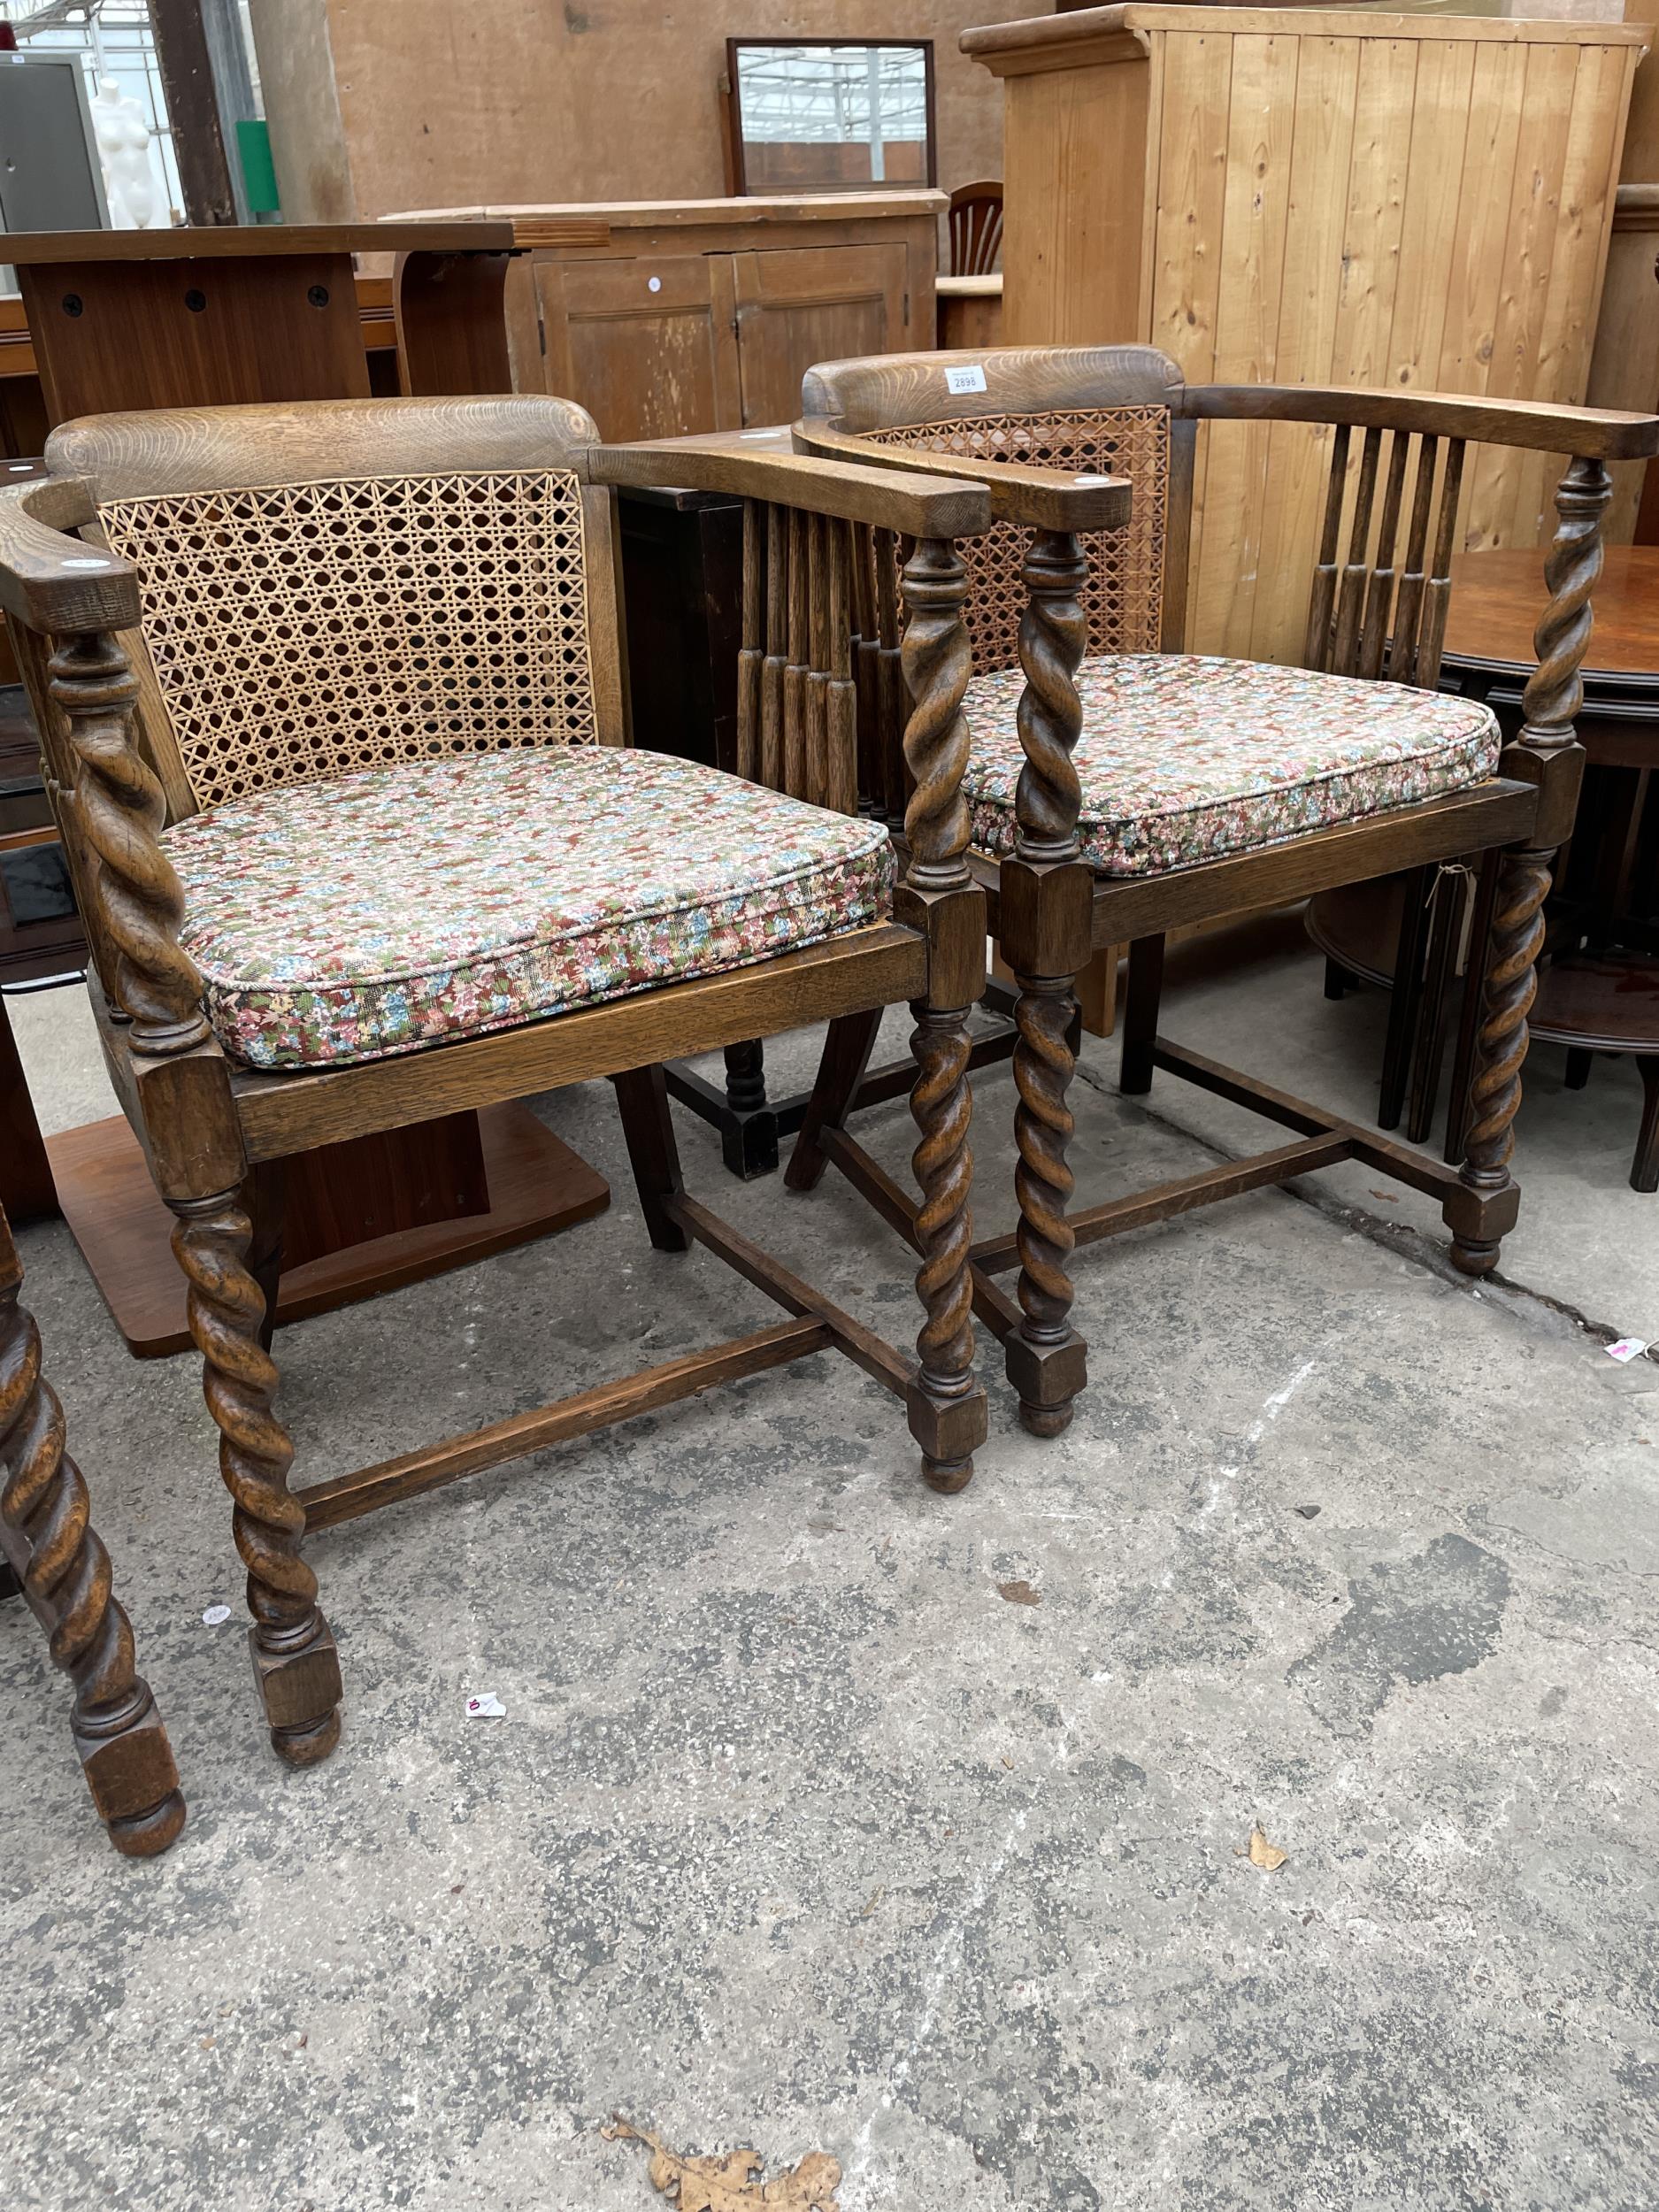 A PAIR OF EARLY 20TH CENTURY OAK TUB CHAIRS WITH CANE SEATS AND BACKS ON BARLEY TWIST LEGS AND - Image 2 of 4